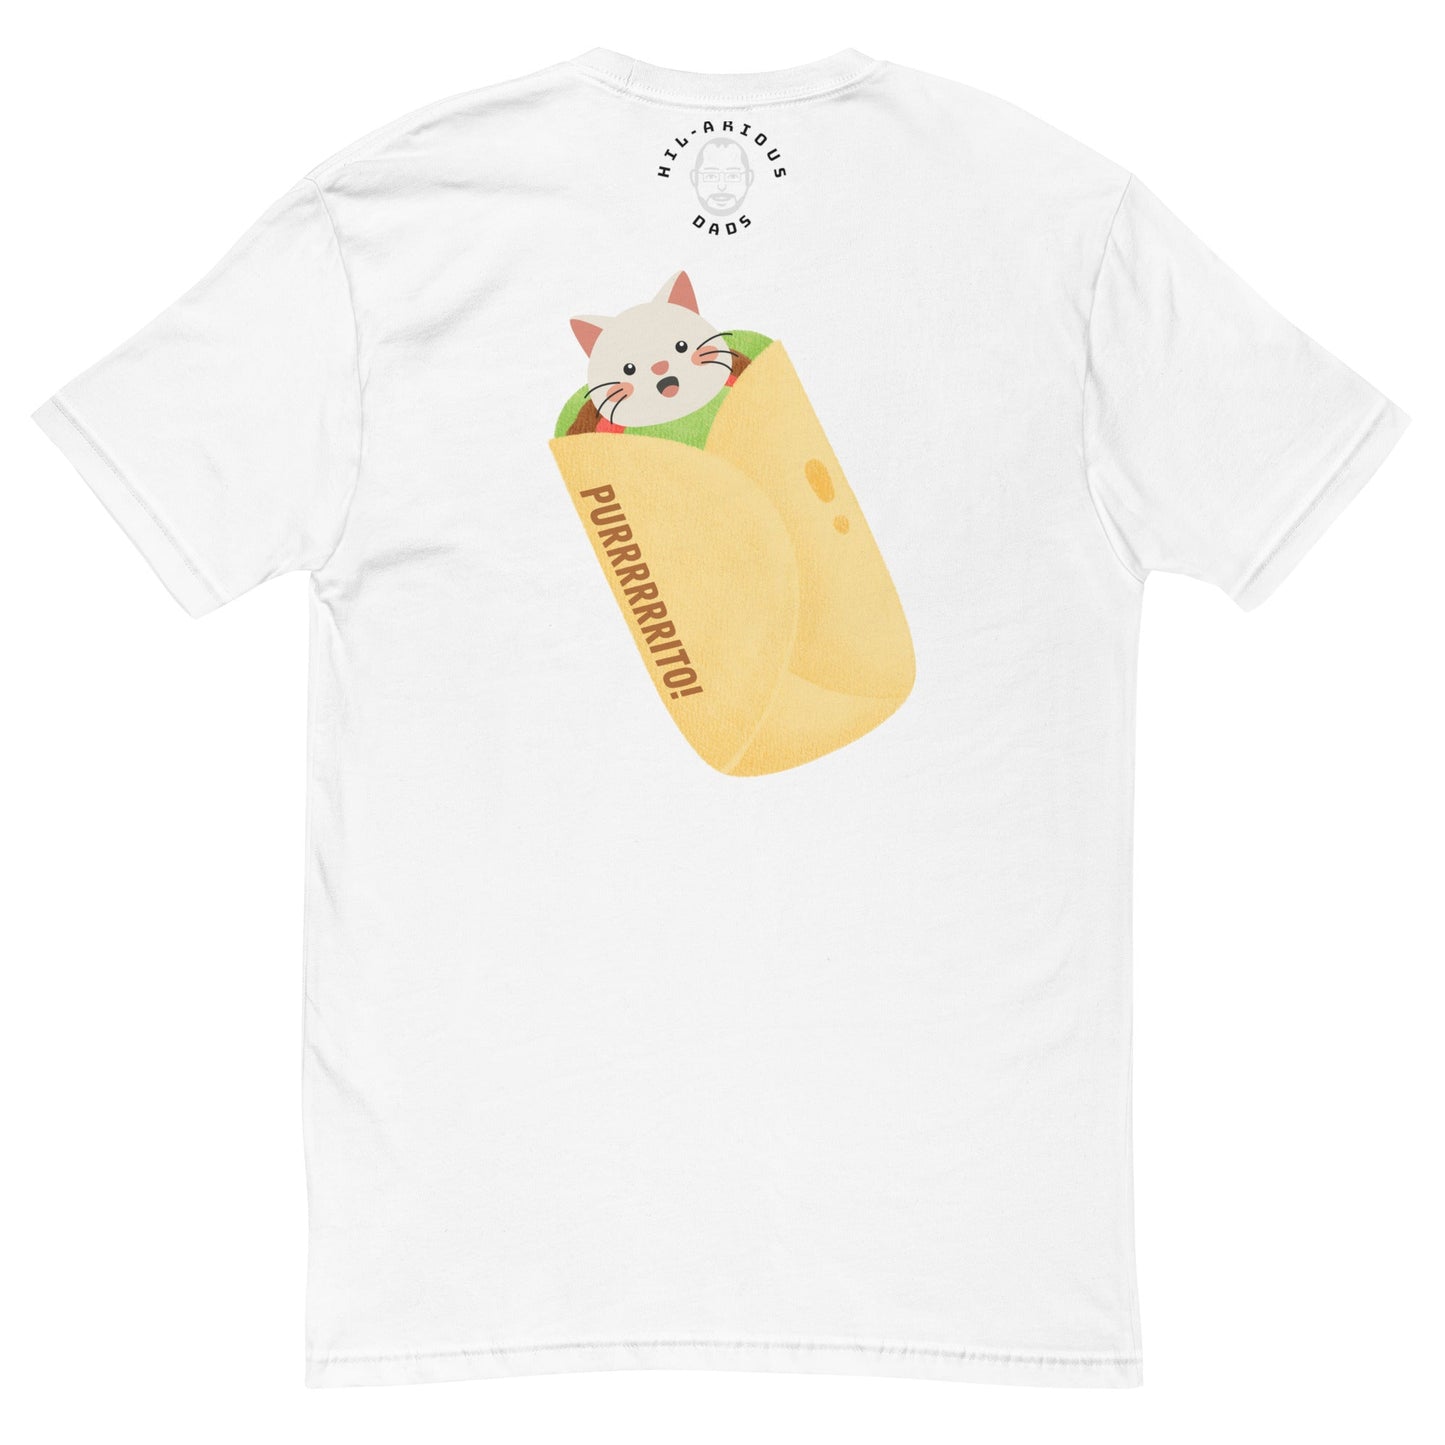 What do you call a cat in a blanket on Cinco De Mayo?-T-shirt - Hil-arious Dads